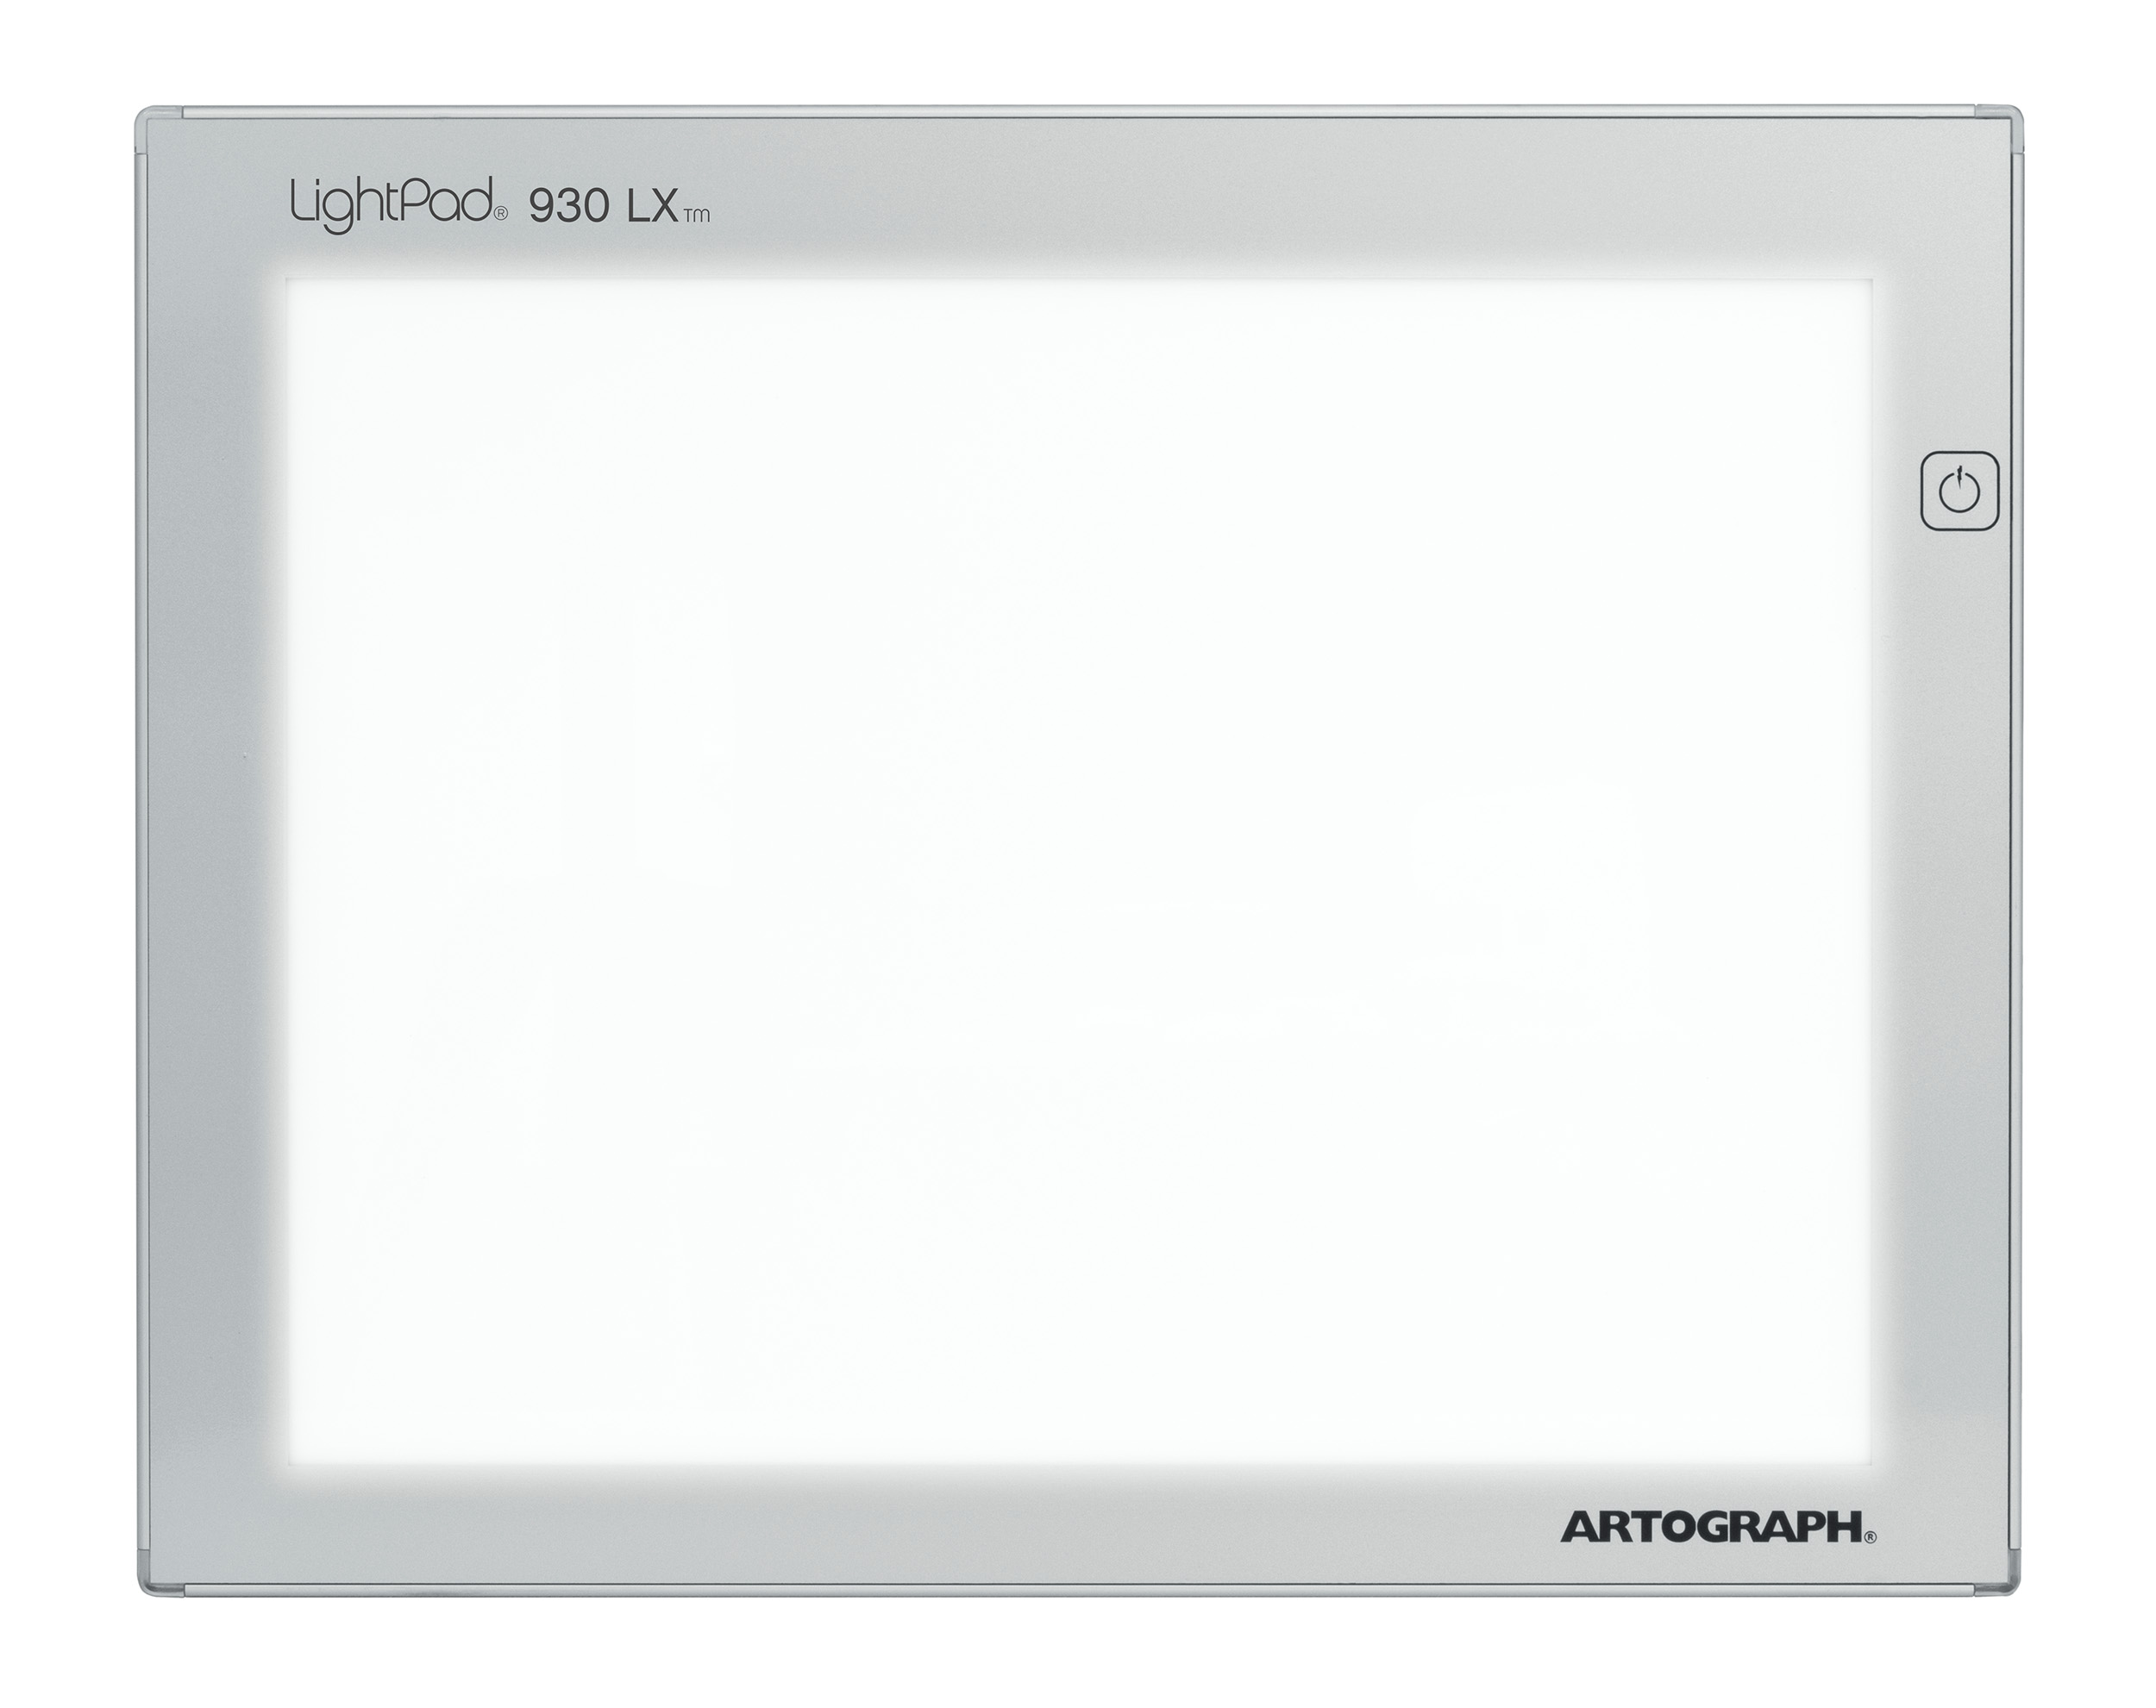 Artograph LightPad® 930 LX - 12" x 9" Thin, Dimmable LED Light Box for Tracing, Drawing - image 5 of 7